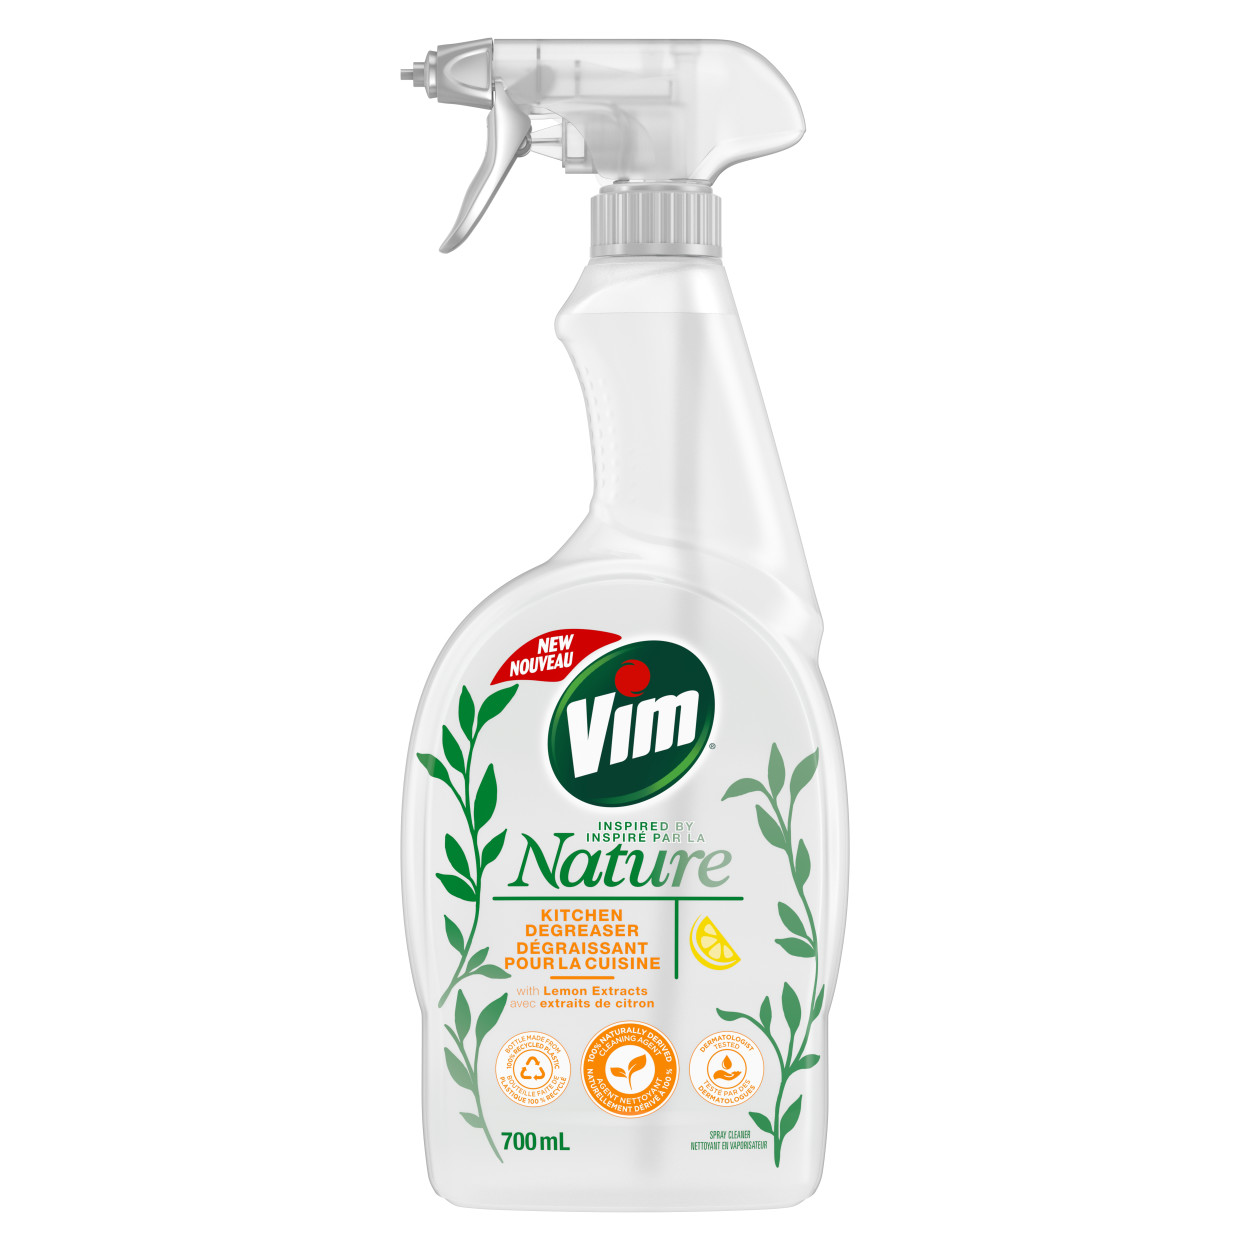 Vim® Inspired by Nature Kitchen Degreaser Spray with Lemon Extracts packshot